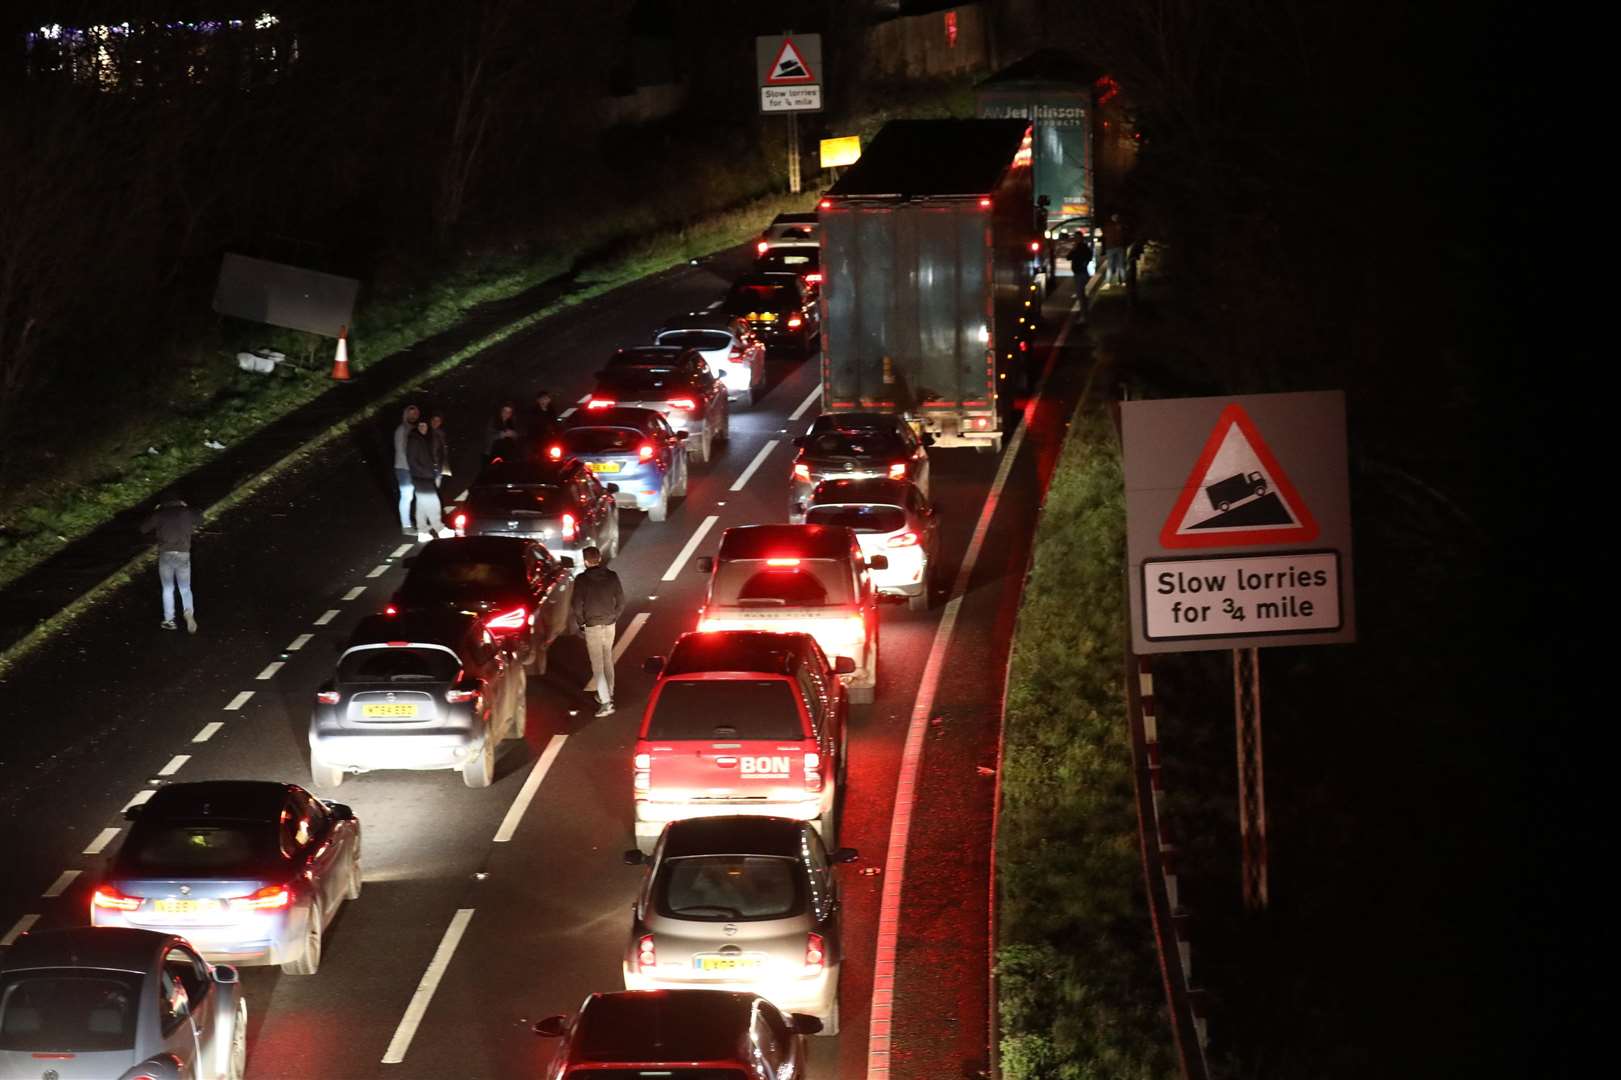 The maddening road chaos tonight. Picture: UK News in Pictures